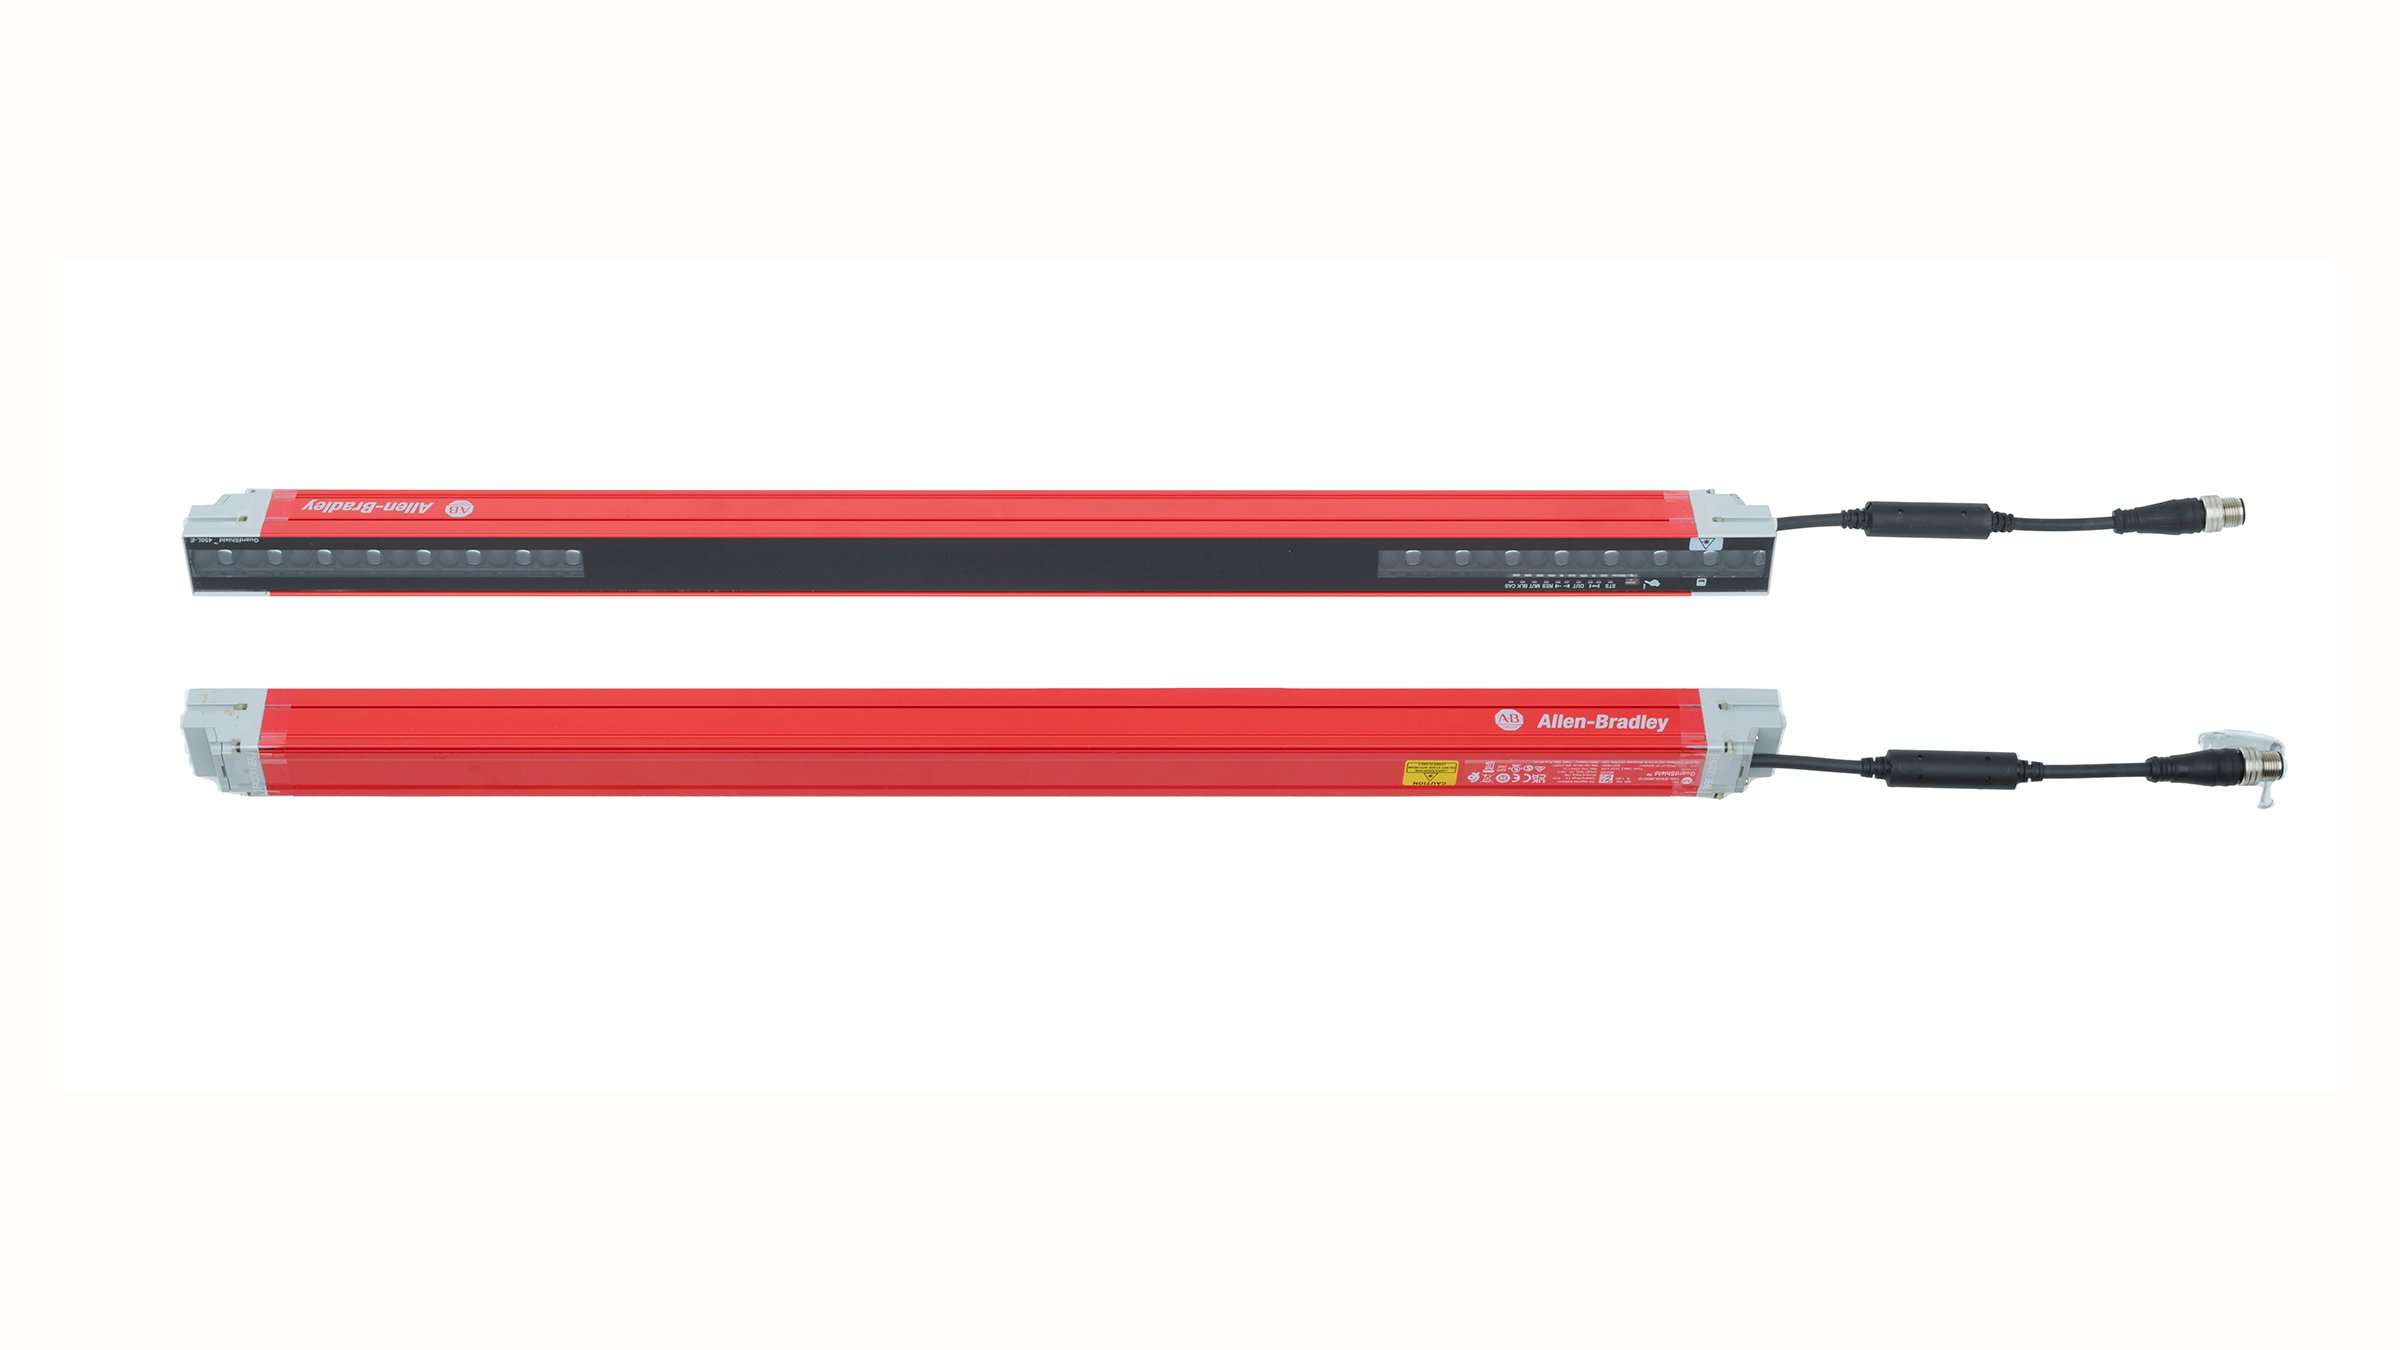 A horizontally-positioned pair of 600 mm long red safety light curtains with grey endcaps, and with lenses facing each other with plug-ins and connector pigtails on the right end